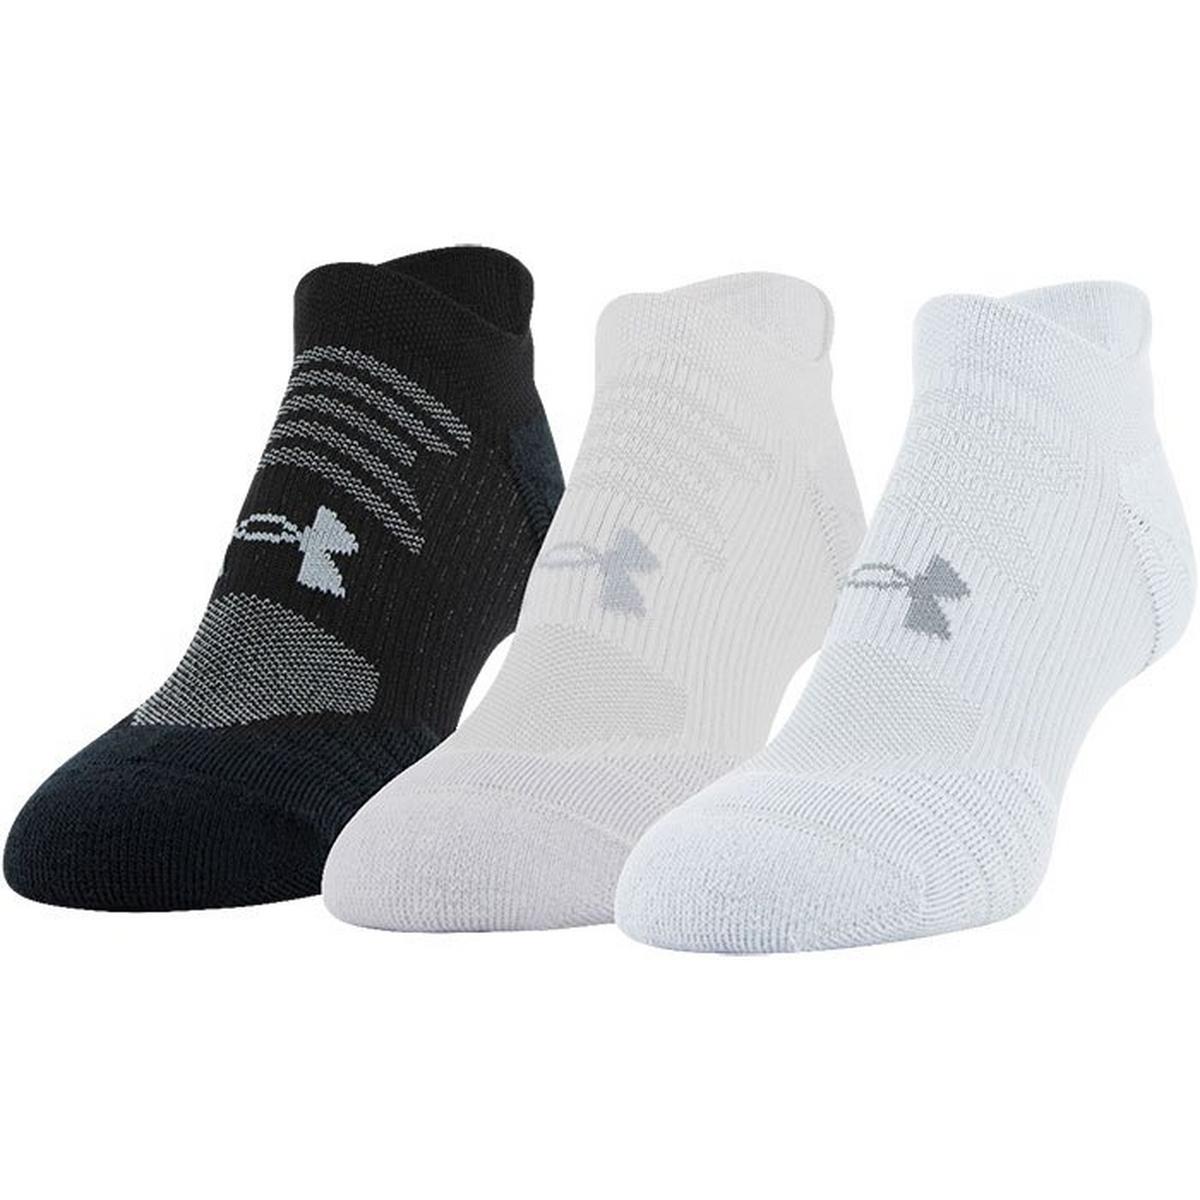 Women's Play Up No-Show Tab Sock (3 Pack)